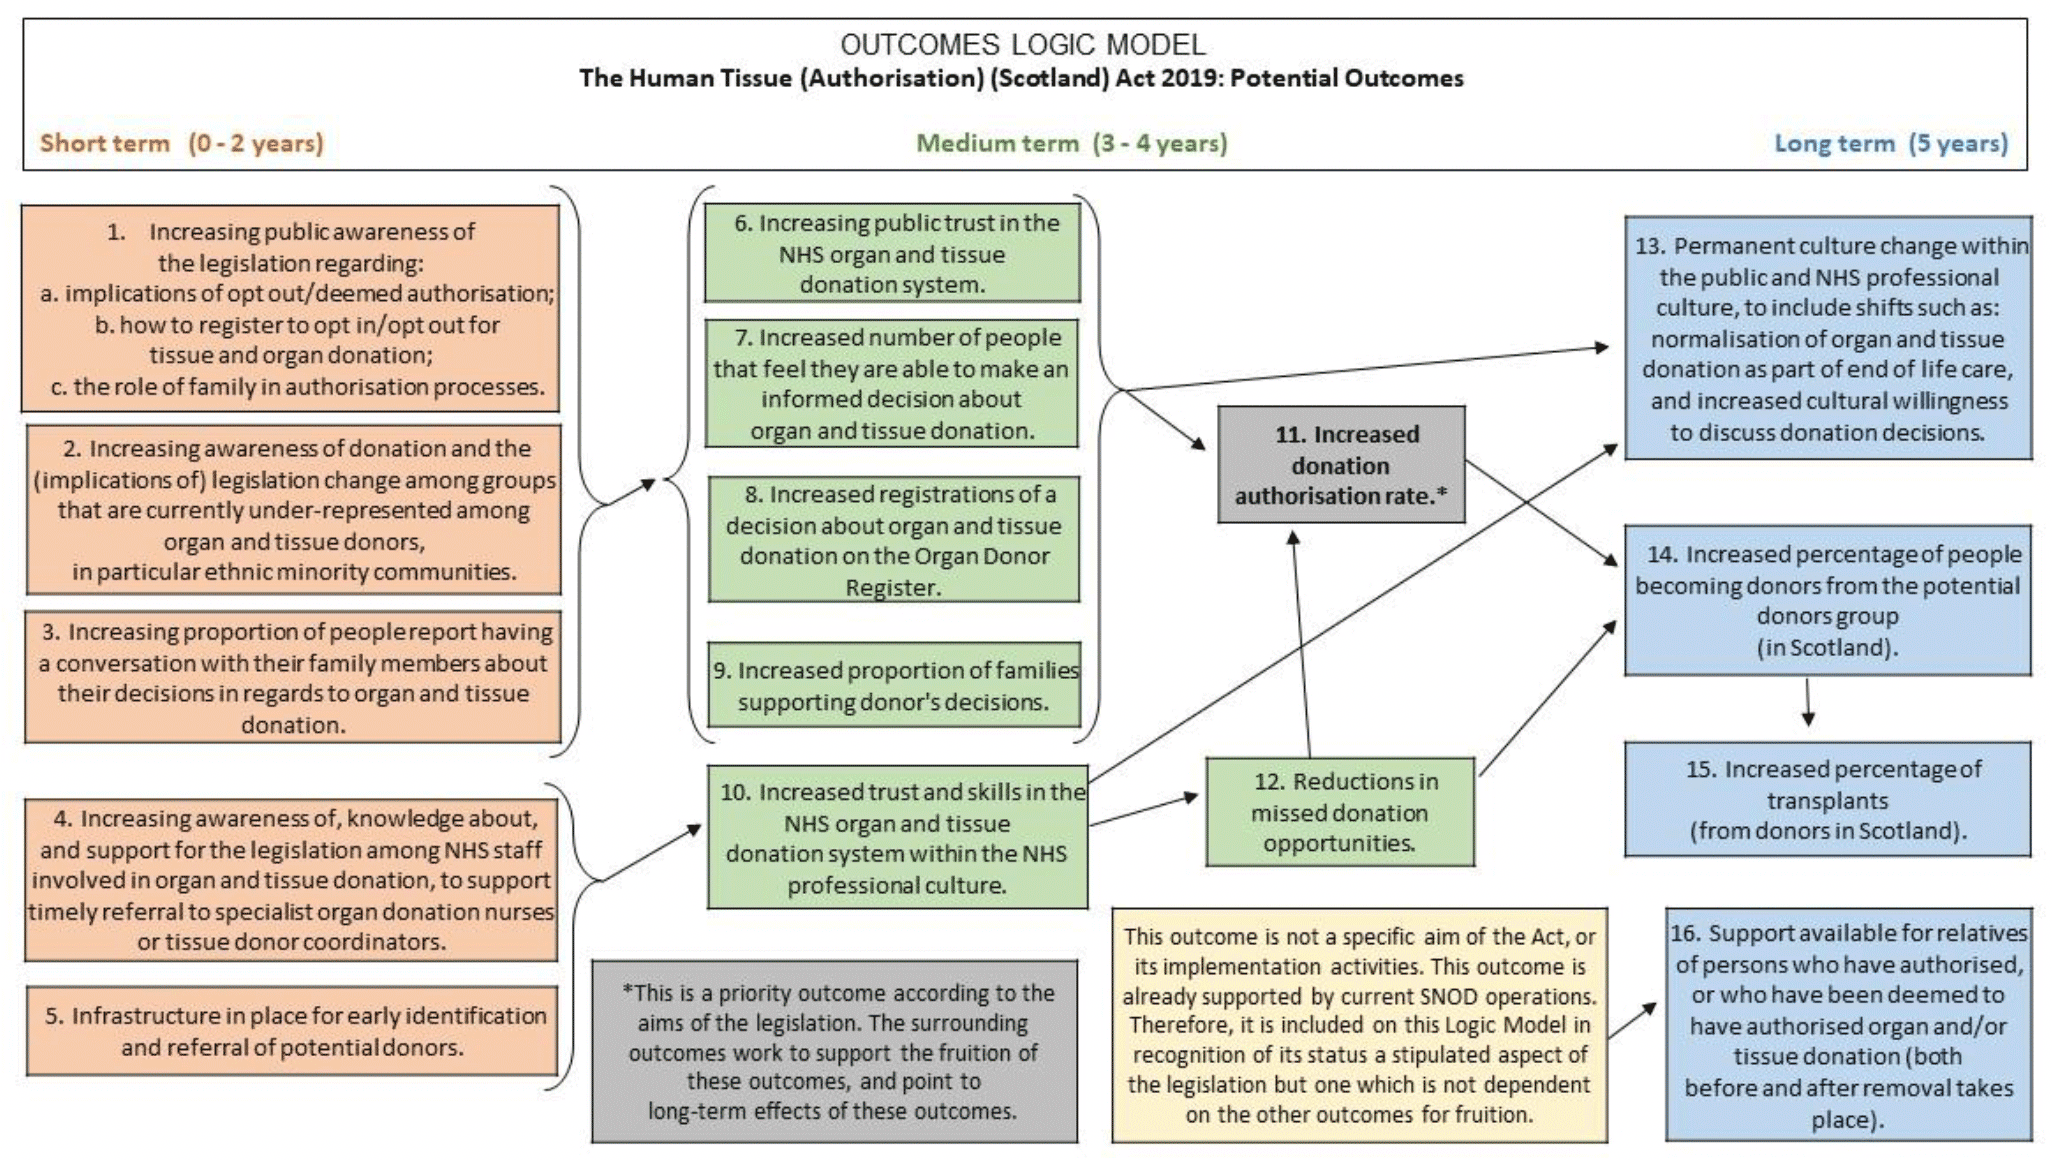 This figure shows the various potential outcomes regarding the Human Tissue (Authorisation) (Scotland) Act 2019. The outcomes are separated into columns denoting short, medium, and long term. Short term is classified as 0-2 years, medium term is classified as 3-4 years, and long term is classified as 5 years. 

The short term outcomes are listed as:
1. Increasing public awareness of the legislation regarding
a. implications of opt-out / deemed authorisation;
b. how to register to opt-in / opt-out for tissue and organ donation, and
c. the role of family in authorisation processes.
2. Increasing awareness of donation and the implication of legislation change among groups that are currently under-represented among organ and tissue donors, in particular ethnic minority communities.
3. Increasing proportion of people reporting having a conversation with their family members about their decisions in regards to organ and tissue donation. 
4. Increasing awareness of, knowledge about, and support for the legislation among NHS staff involved in organ and tissue donation, to support timely referral to specialist organ donation nurses or tissue donor coordinators, and
5. Infrastructure in place for early identification and referral of potential donors. 

The medium term outcomes are listed as: 
6. Increasing public trust in the NHS organ and tissue donation system.
7. Increased number of people that feel they are able to make an informed decision about organ and tissue donation. 
8. Increased registrations of a decision about organ and tissue donation on the Organ Donor Register. 
9. Increased proportion of families supporting donor’s decisions.
10. Increased trust and skills in the NHS organ and tissue donation system within the NHS professional culture. 
11. Increased donation authorisation rate, and
12. Reductions in missed donor opportunities. 
Number 11 – Increased donation authorisation rate is denoted as a priority outcome according to the aims of the legislation. 

The long term outcomes are listed as: 
13. Permanent culture change within the public and NHS professional culture, to include shifts such as: normalisation of organ and tissue donation as part of end of life care, and increased cultural willingness to discuss donation decisions. 
14. Increased percentage of people becoming donors from the potential donors group (in Scotland). 
15. Increased percentage of transplants (from donors in Scotland), and
16. Support available for relatives of persons who have authorised, or who have been deemed to have authorised organ and/or tissue donation (both before and after removal takes place). 
It has been noted that number 16 is not a specific aim of the Act or its implementation activities and is already supported by current SNOD operations. 
Relationships between the outcomes are denoted by arrows. Outcomes 1 to 4 are linked to outcomes 6 to 9, through to outcome 11, 13, 14 and 15. Outcomes 4 and 5 are linked to outcomes 10, 11 and 12, through to 13, 14 and 15.
